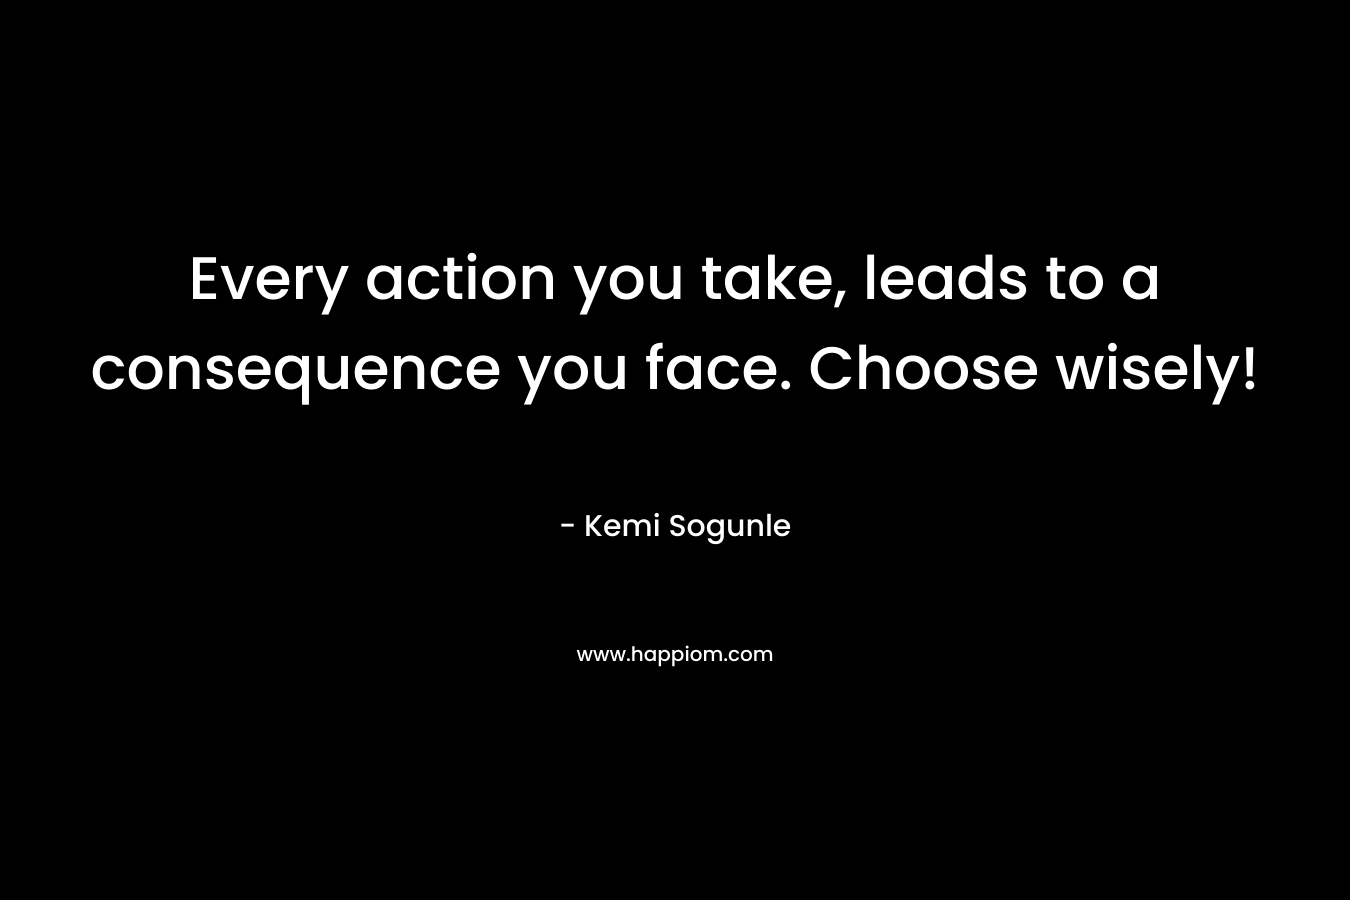 Every action you take, leads to a consequence you face. Choose wisely!